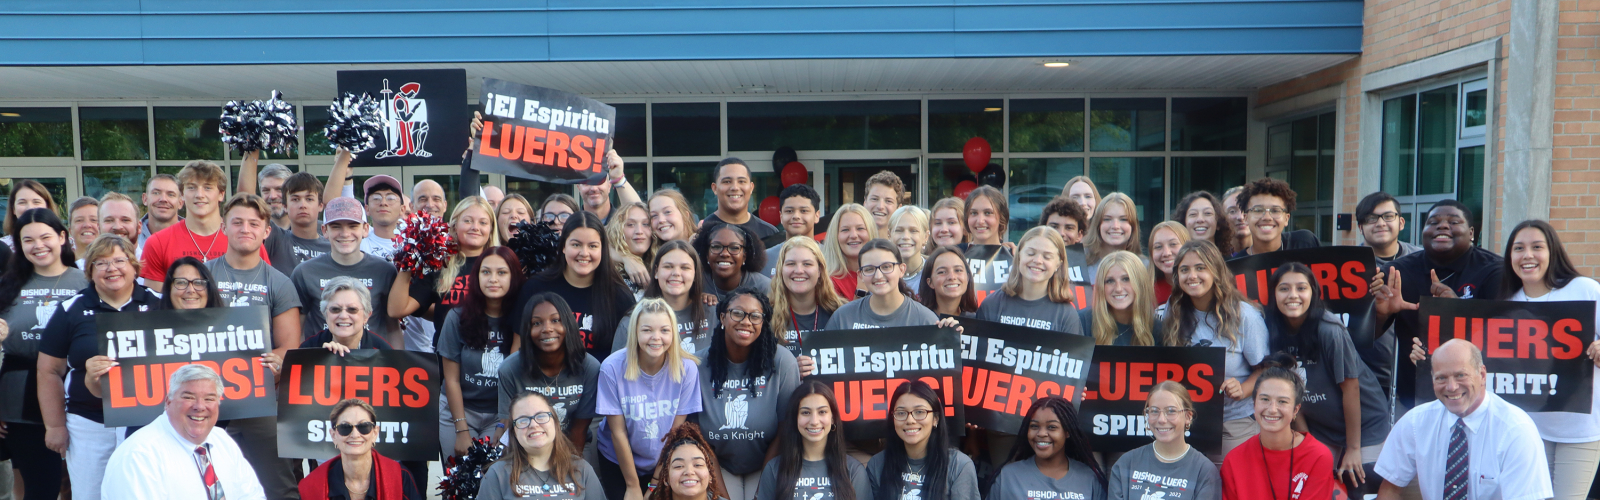 a large group of students smiling and holding "El espíritu Luers!/Luers Spirit!" banners